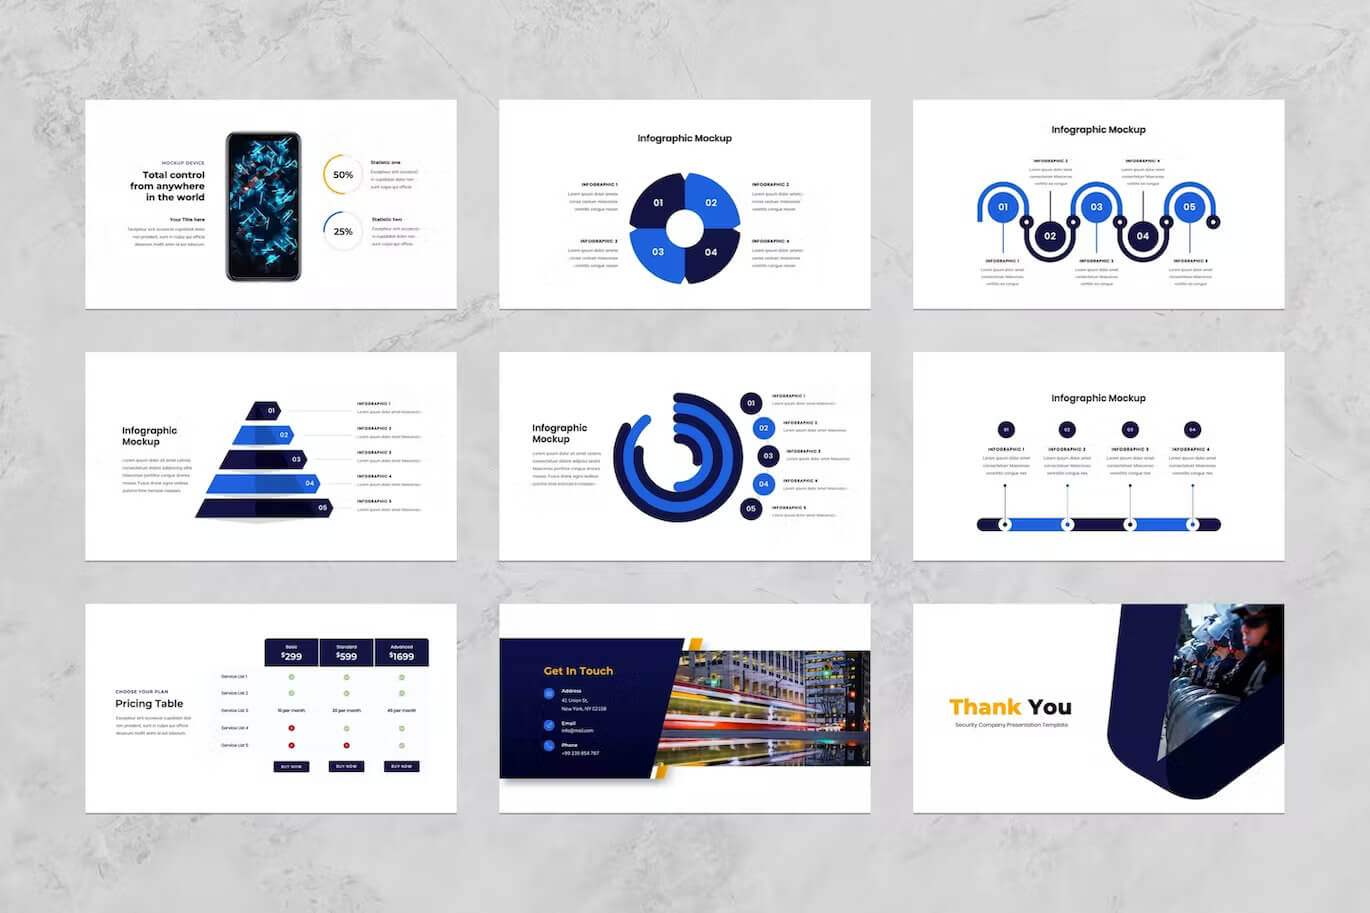 Picture with nine Powerpoint templates "Infographic Mockup", "Pricing Table", "Get in Touch".